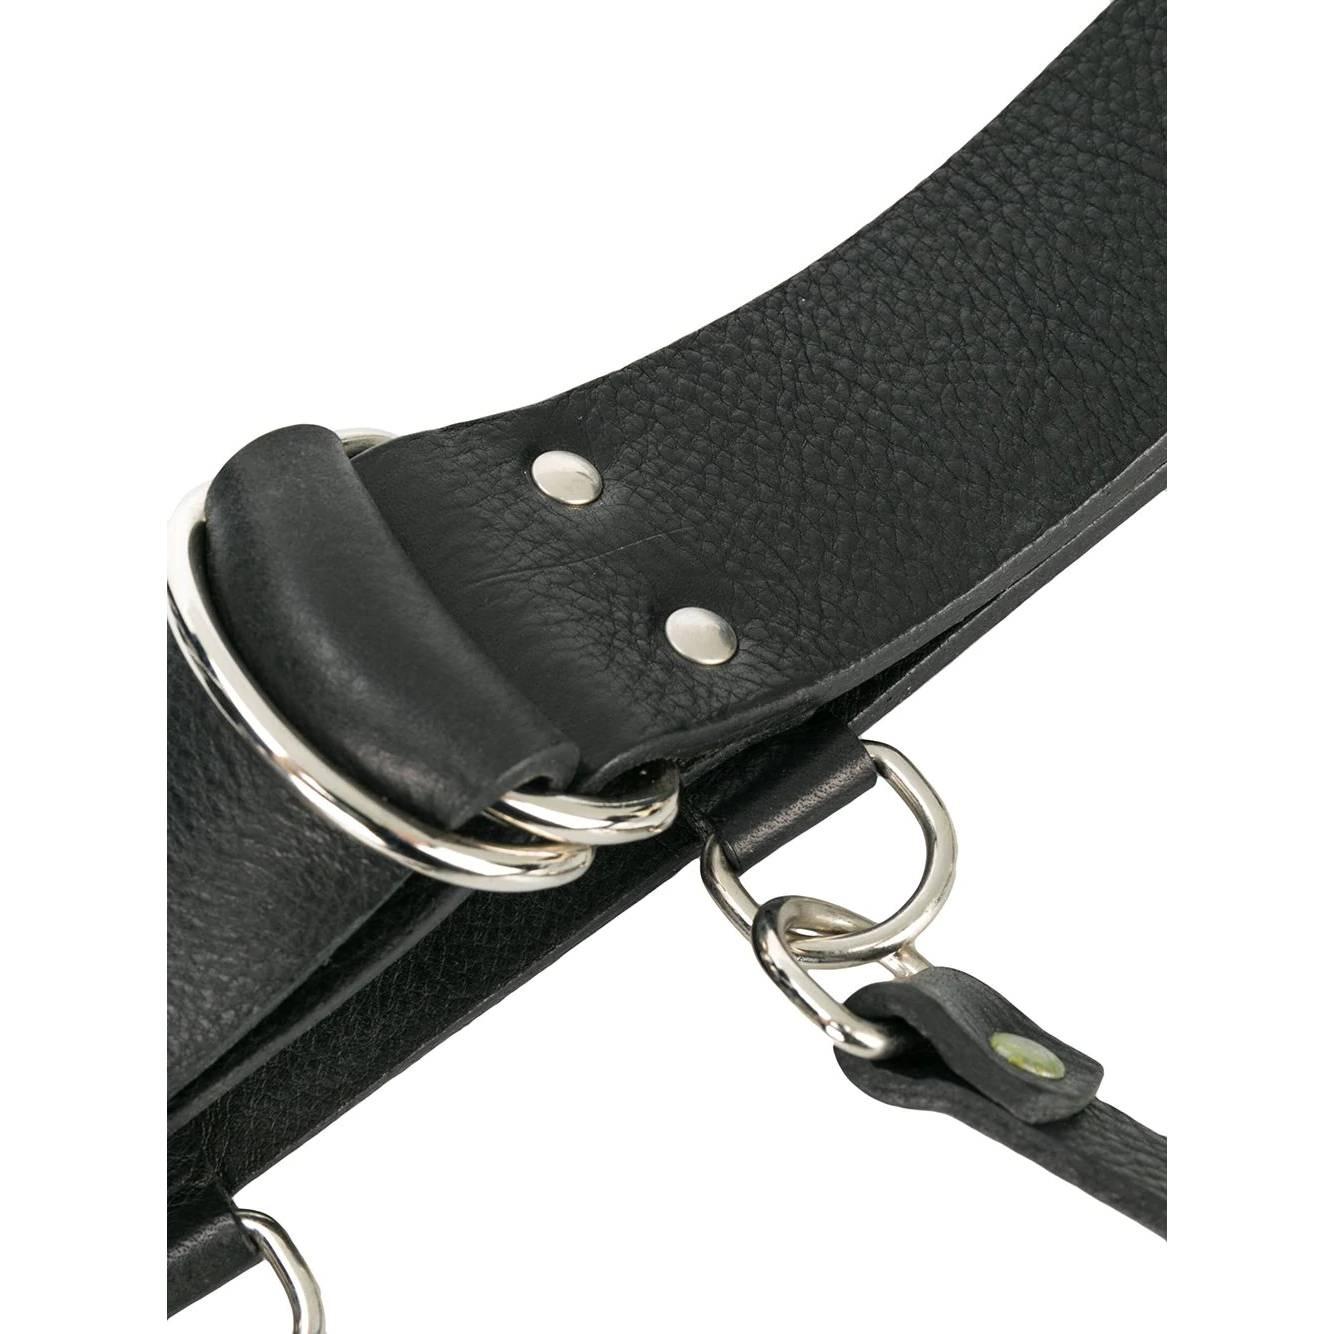 Gianfranco Ferré black leather belt with braces, closure at the waist with double ring buckle. Silver metal details.

The product has slightly oxidized metal parts as shown in the pictures.


Years: 90s

Belt

Lenght: 90 cm